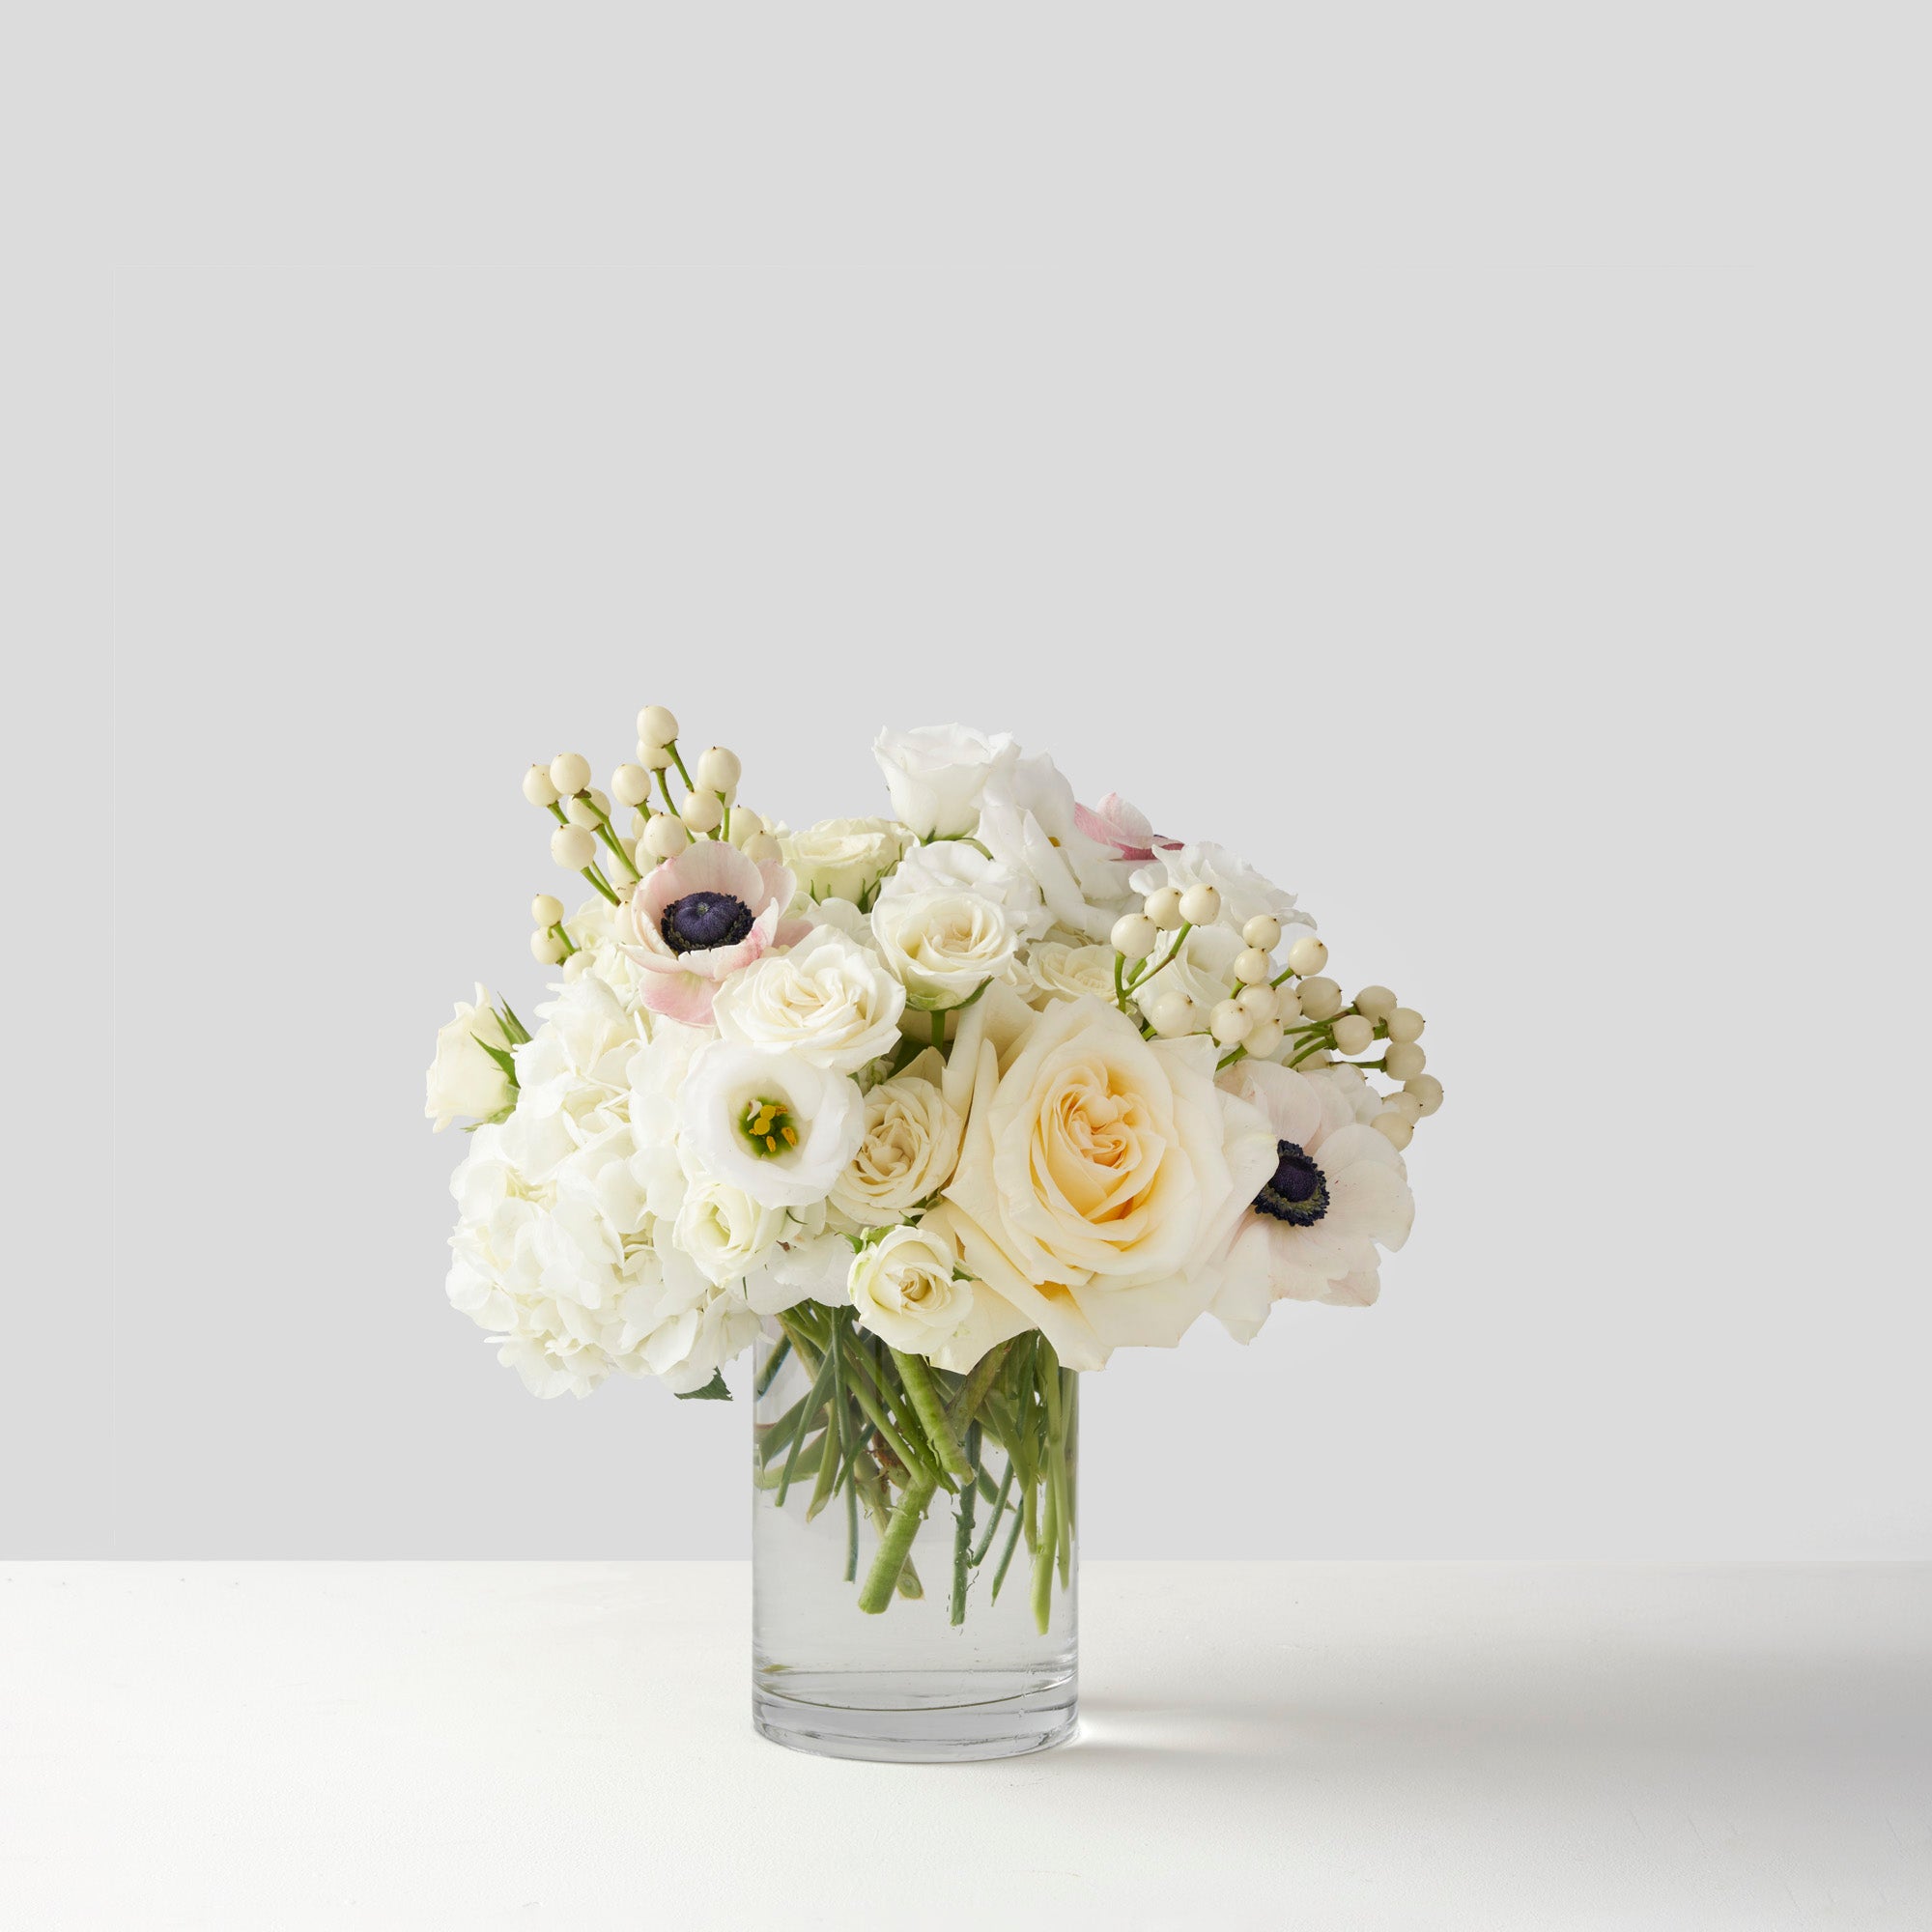 Clear glass vase full of cream and white flowers on white background.